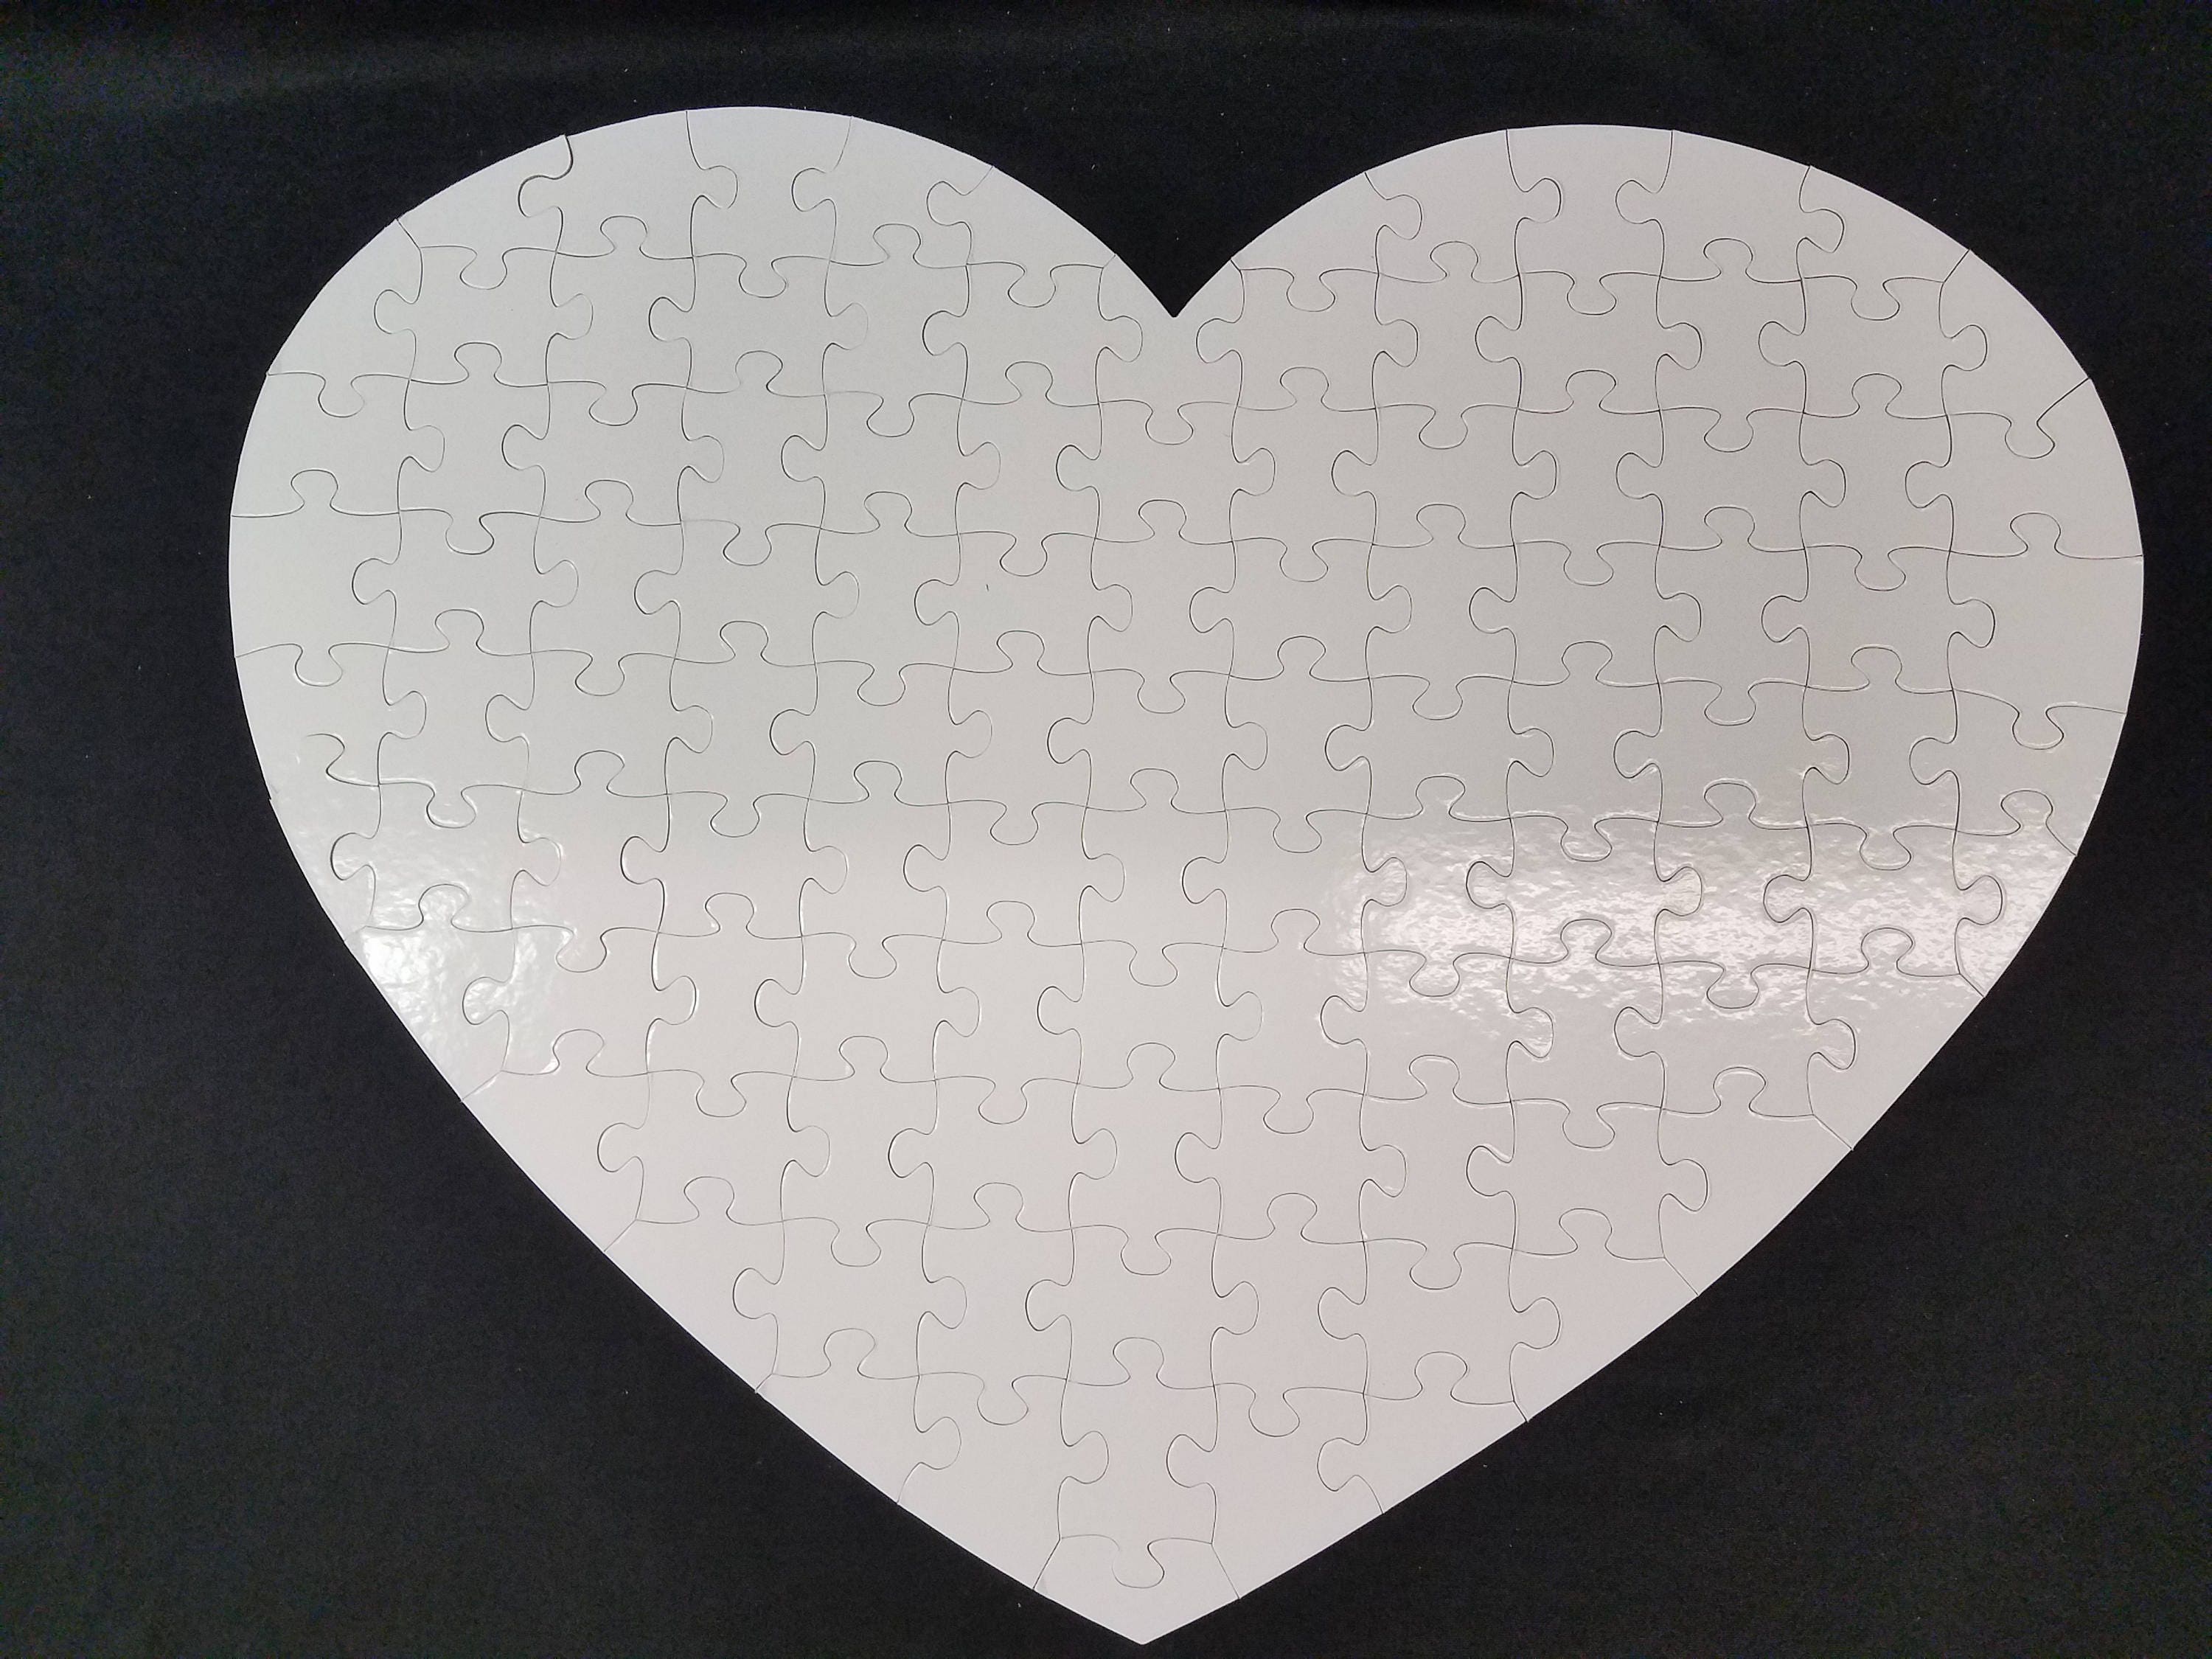 Sublimation Puzzles blanks Sublimation Jigsaw Puzzle Heart and Square shape  3 pc